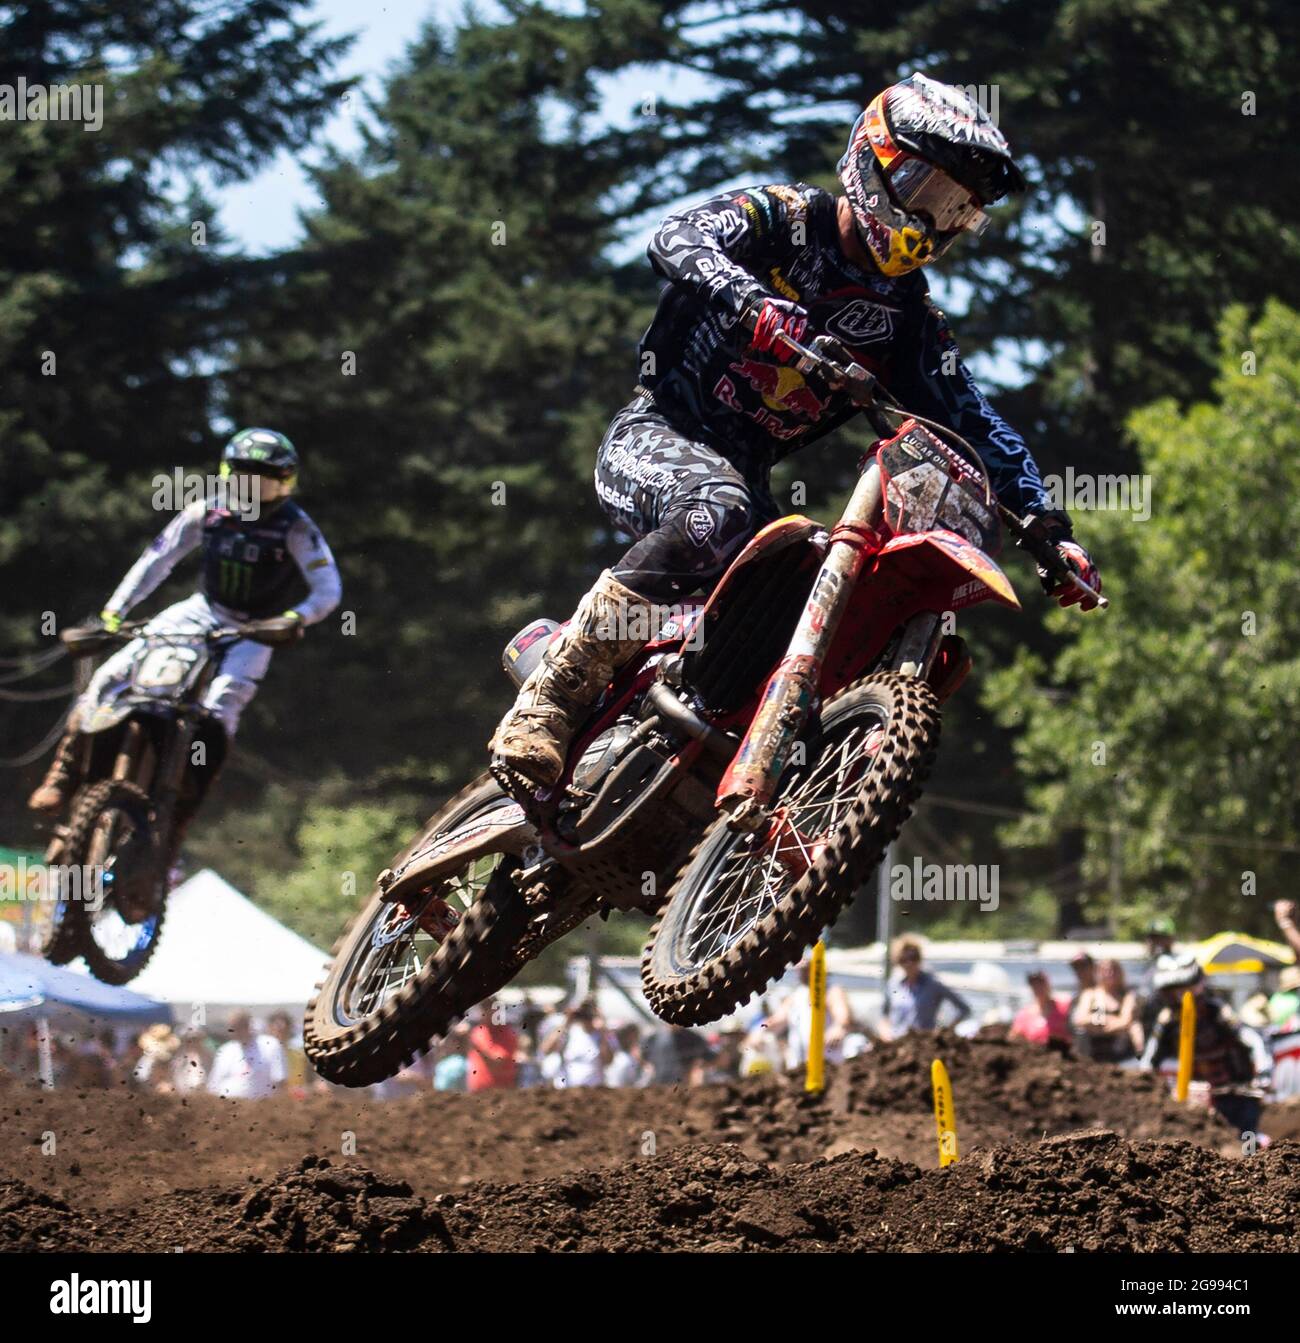 JUL 24 2021 Washougal, WA USA Troy Lee Designs/ Red Bull/ GASGAS Factory Racing Pierce Brown(45) gets big air between sections 35-36 during the Lucas Oil Pro Motocross Washougal Championship 250 class moto # 1 at Washougal MX park Washougal, WA Thurman James/CSM Stock Photo